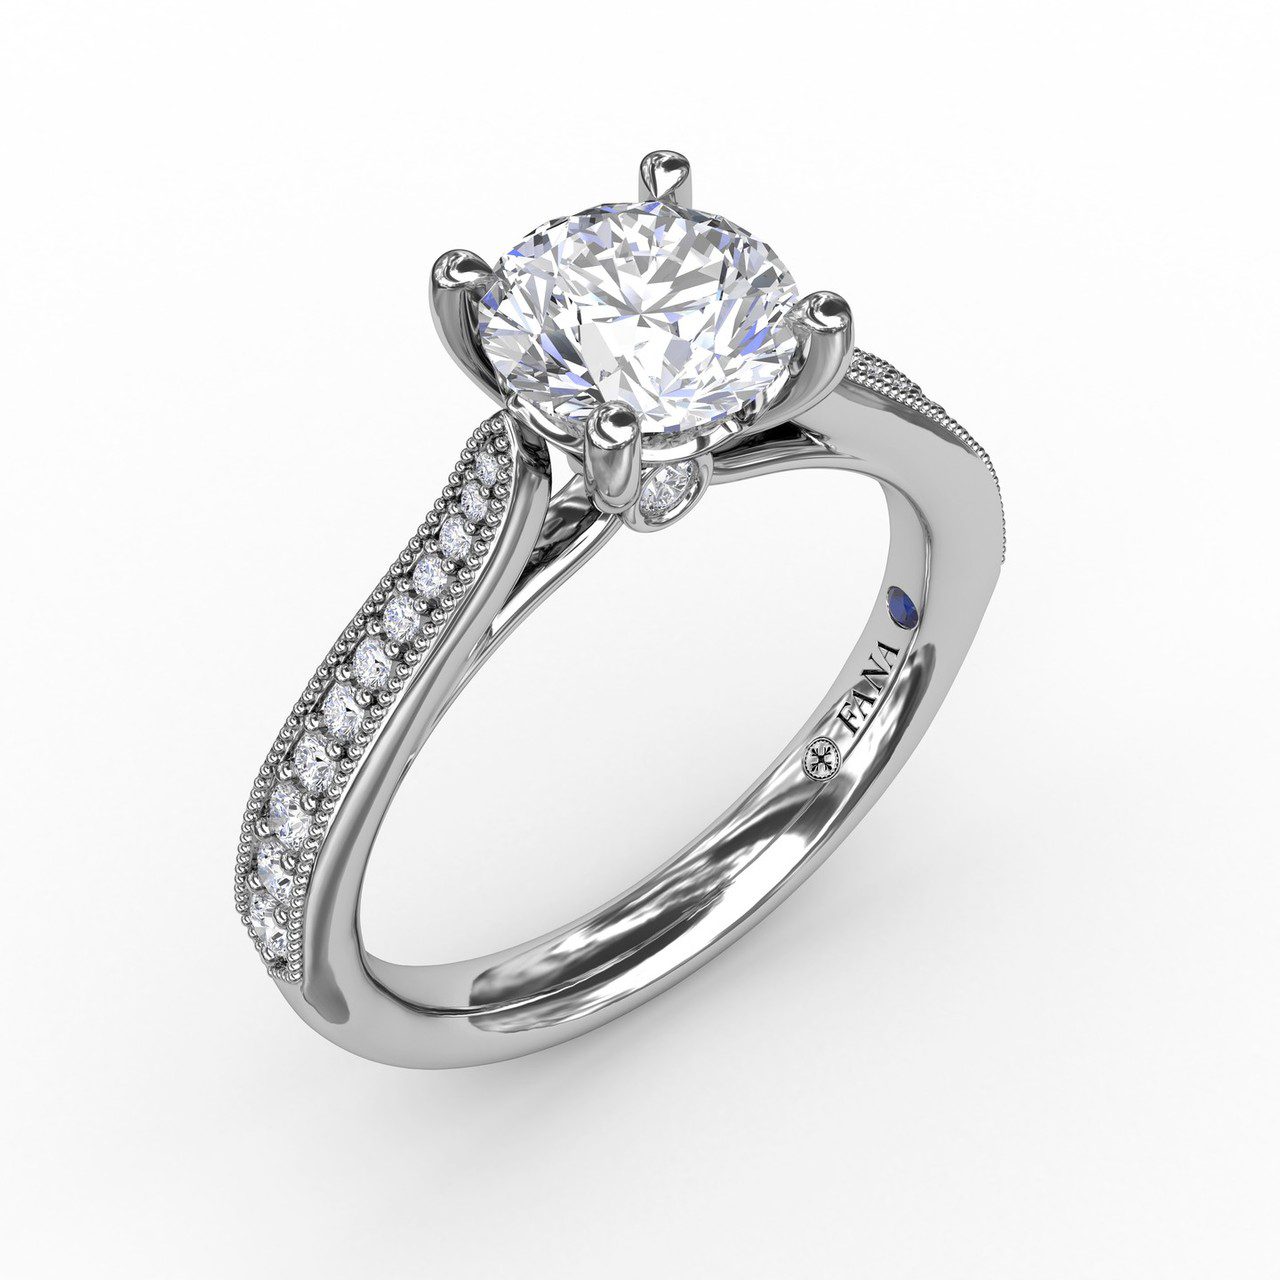 Engagement Ring Upgrades: 6 Ways to Get a New Look